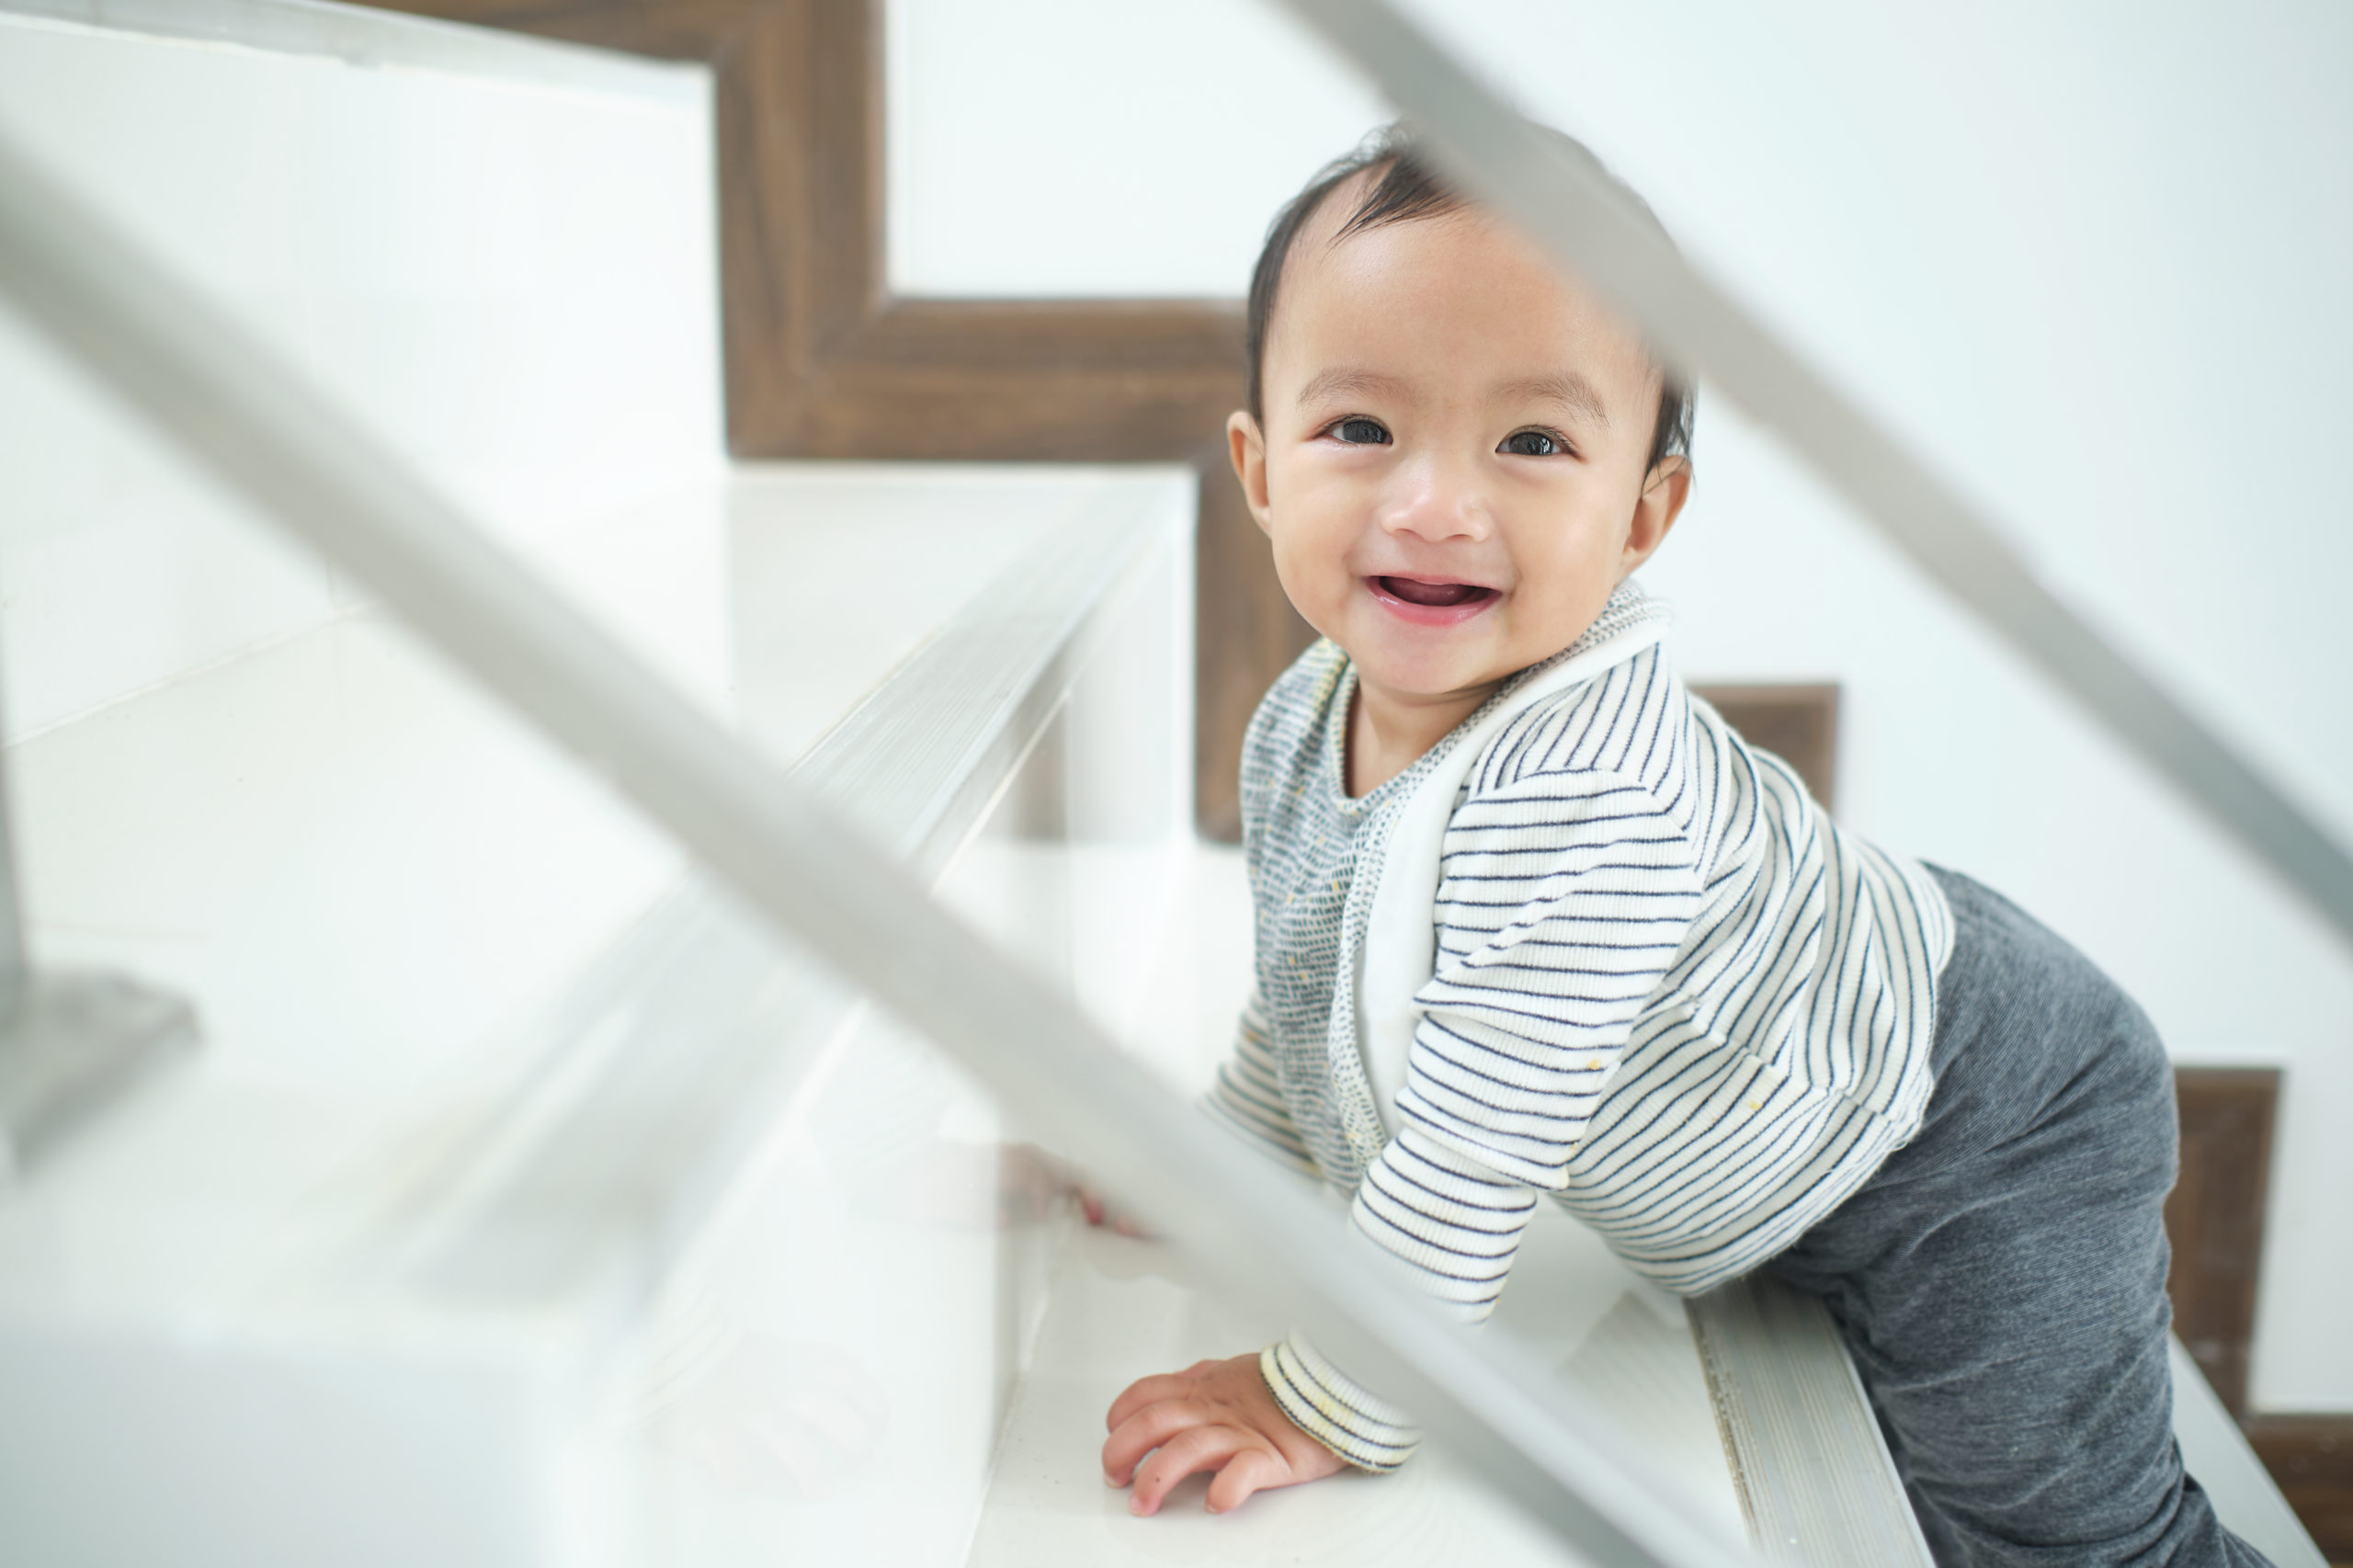 New Parent’s Guide to Childproofing at Kids 'R' Kids Suwanee, preschool, daycare, childcare